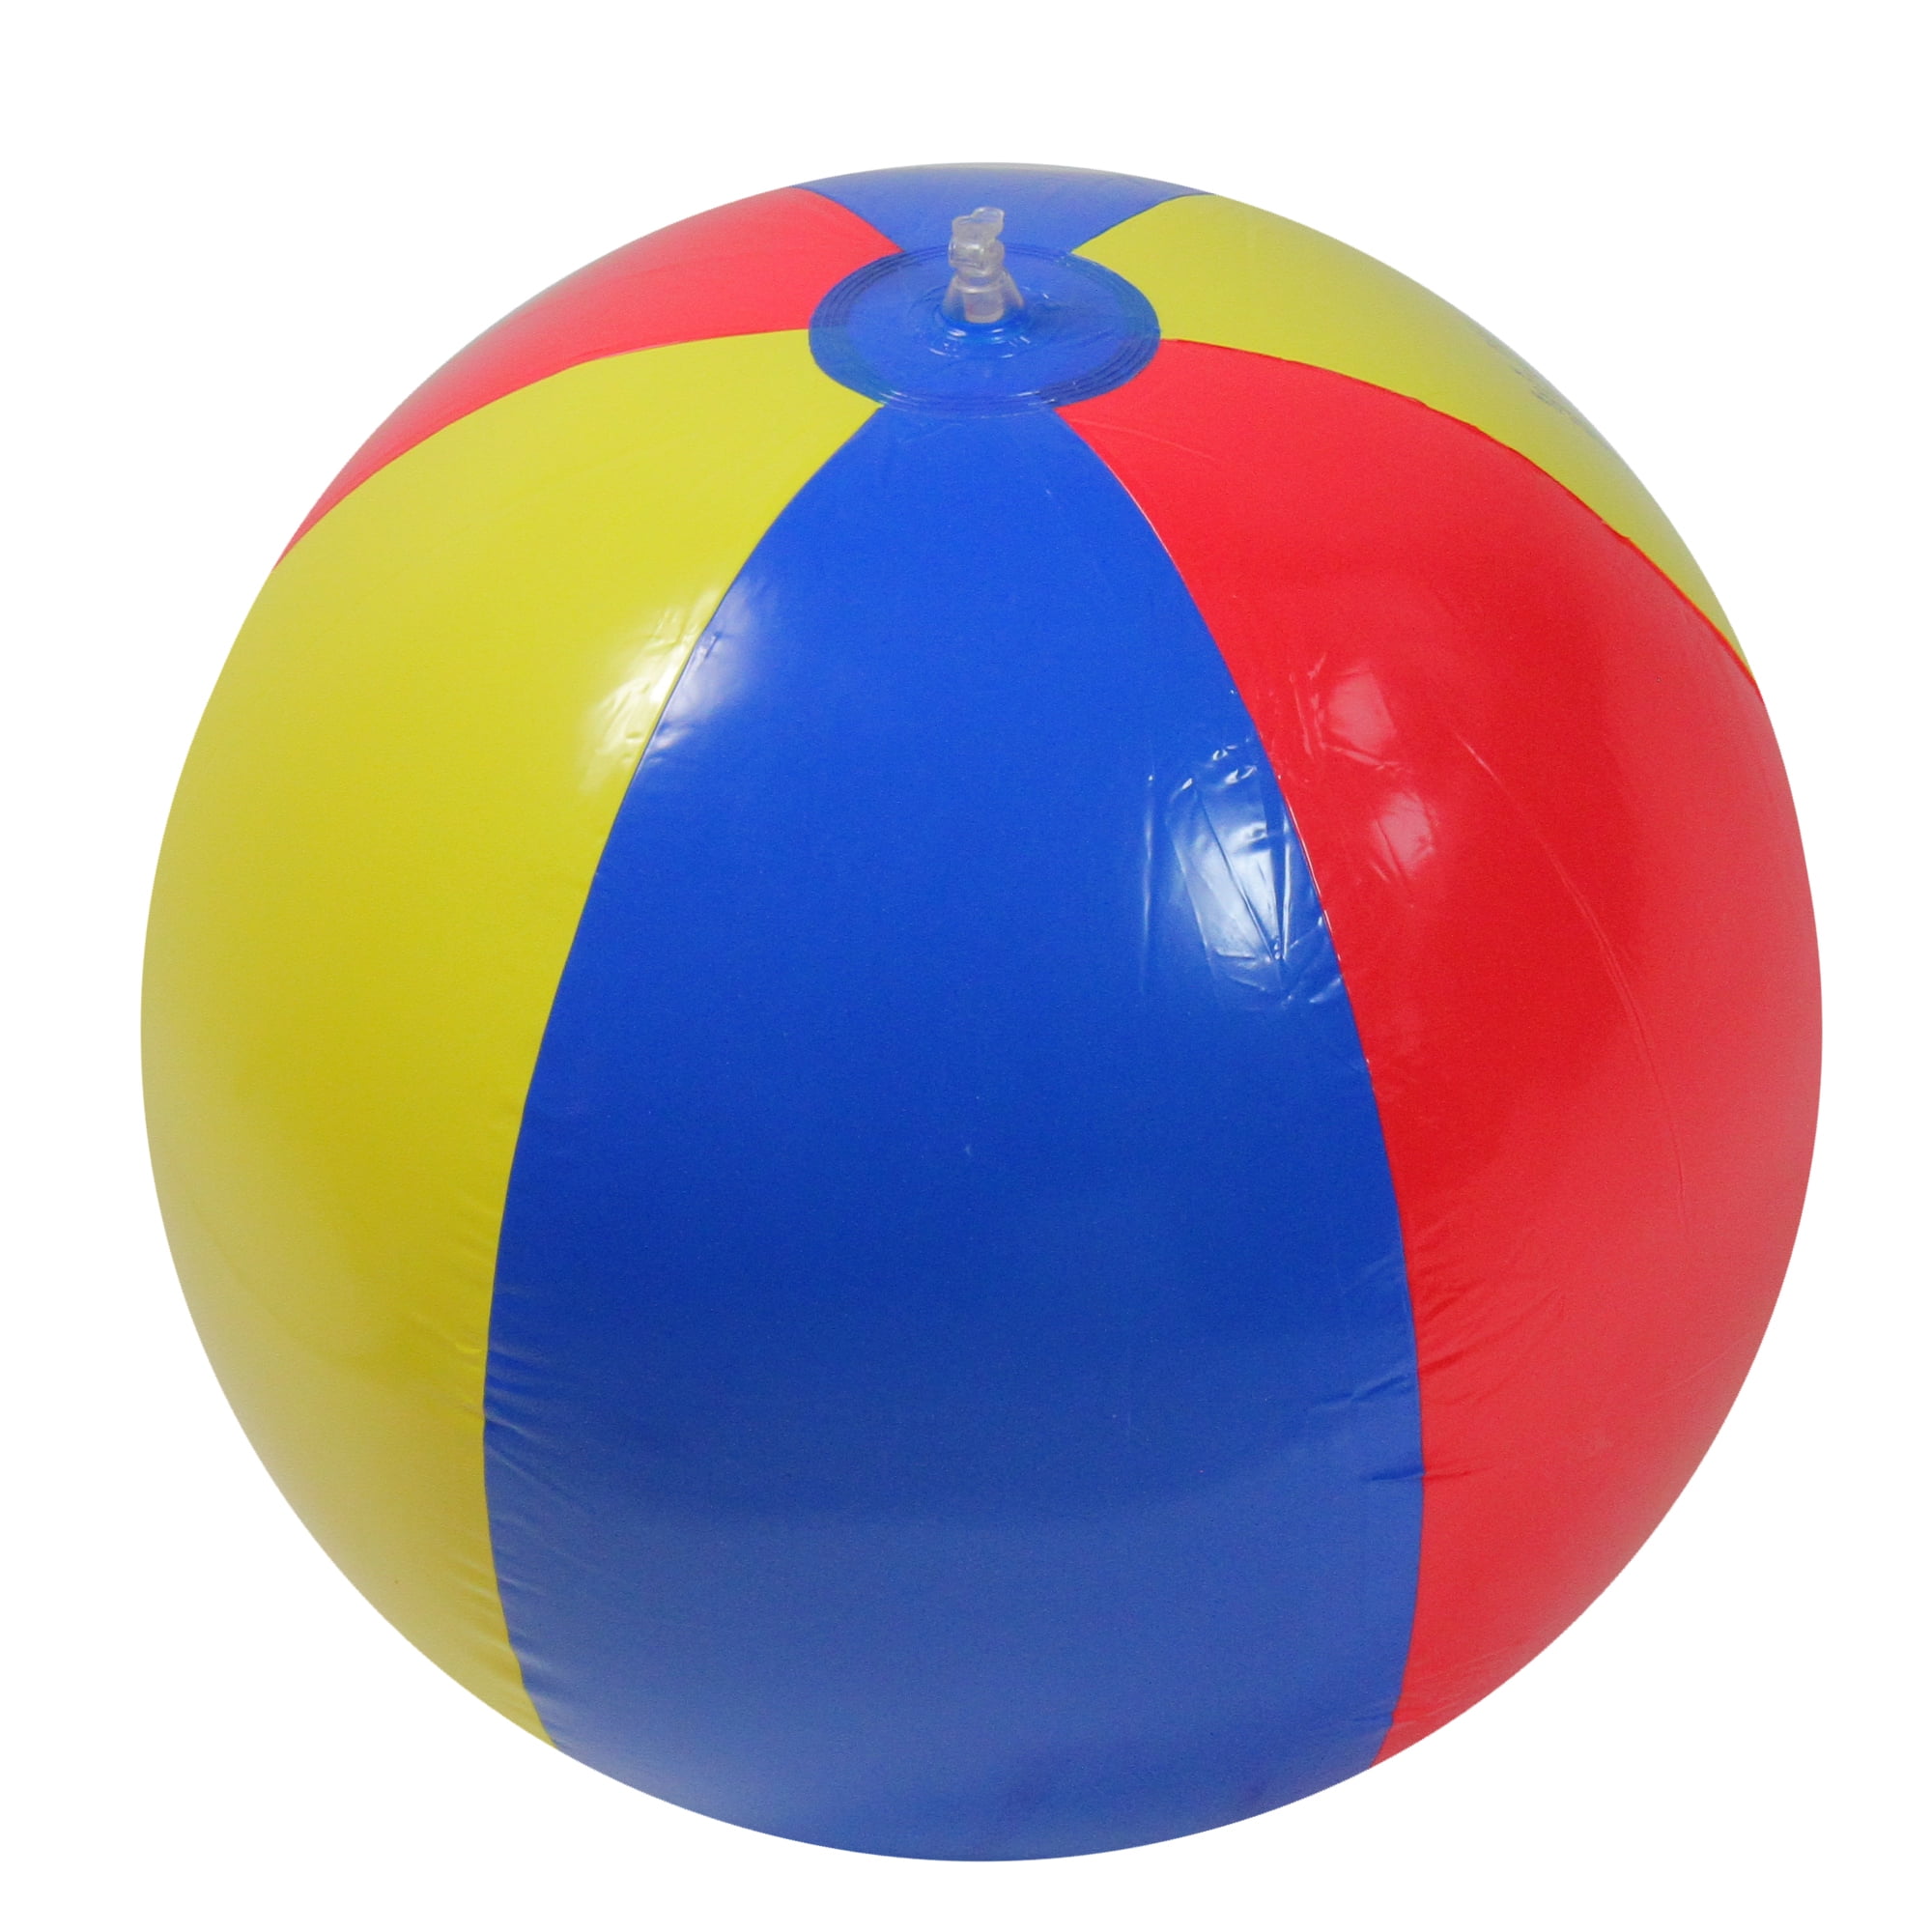 PVC inflatable ball beach pool party play inflatable balloons kids toys UTS 